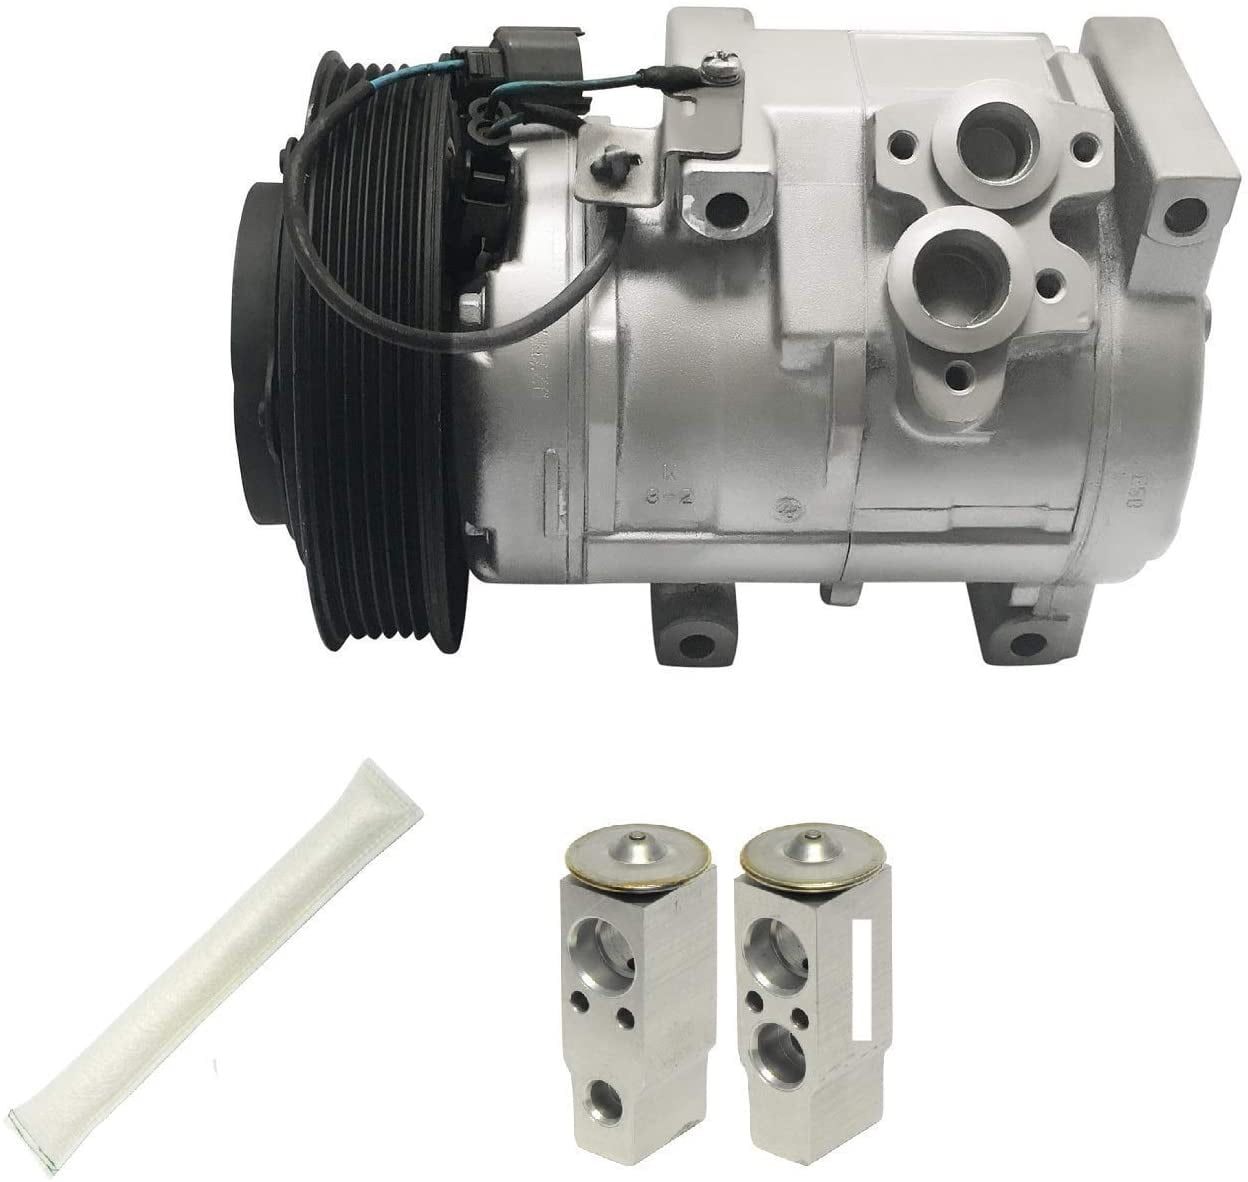 RYC Remanufactured AC Compressor Kit KT DH06 